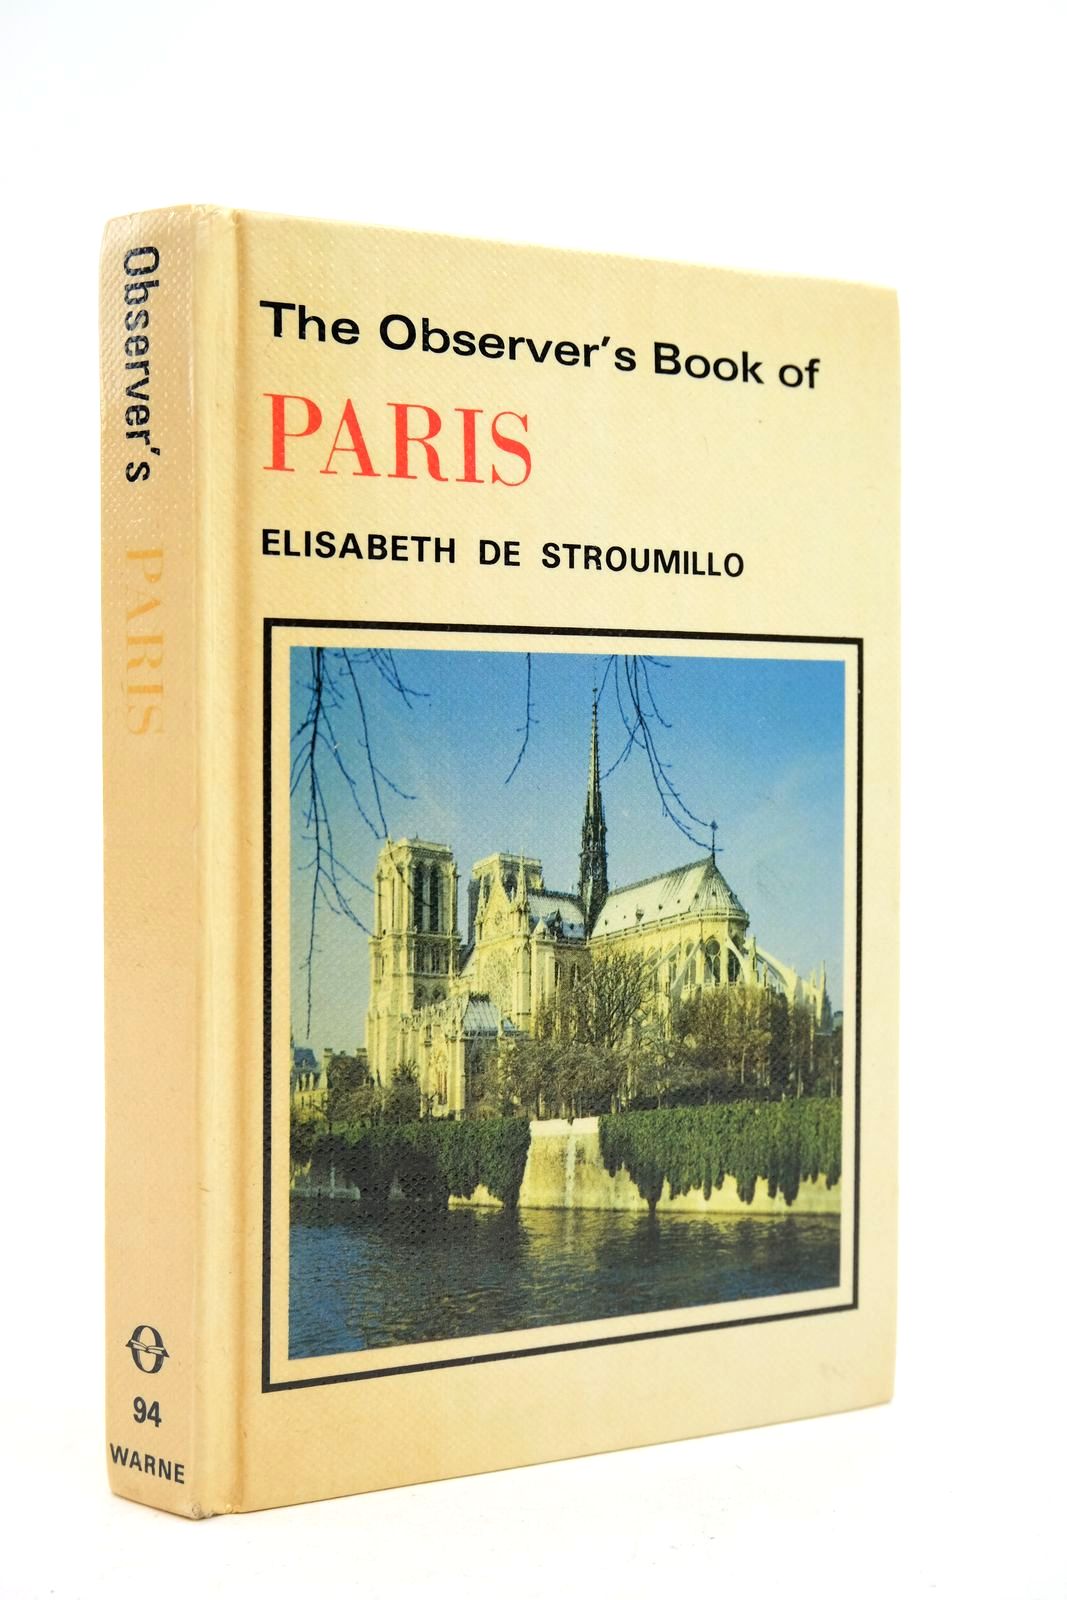 Photo of THE OBSERVER'S BOOK OF PARIS written by De Stroumillo, Elisabeth published by Frederick Warne &amp; Co Ltd. (STOCK CODE: 2139673)  for sale by Stella & Rose's Books